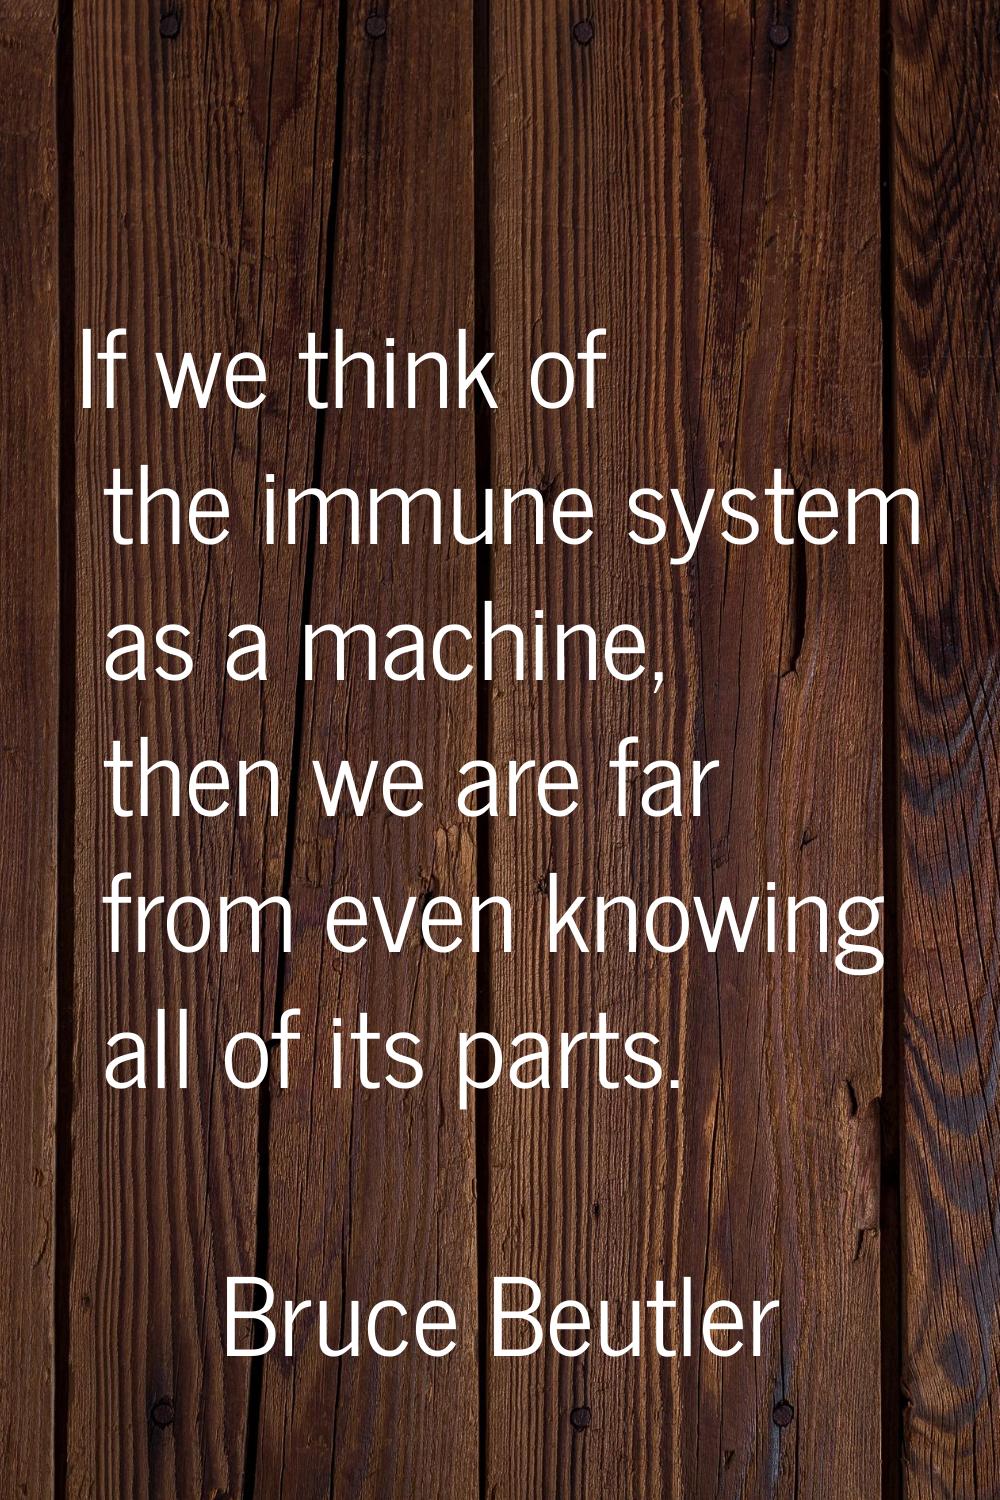 If we think of the immune system as a machine, then we are far from even knowing all of its parts.